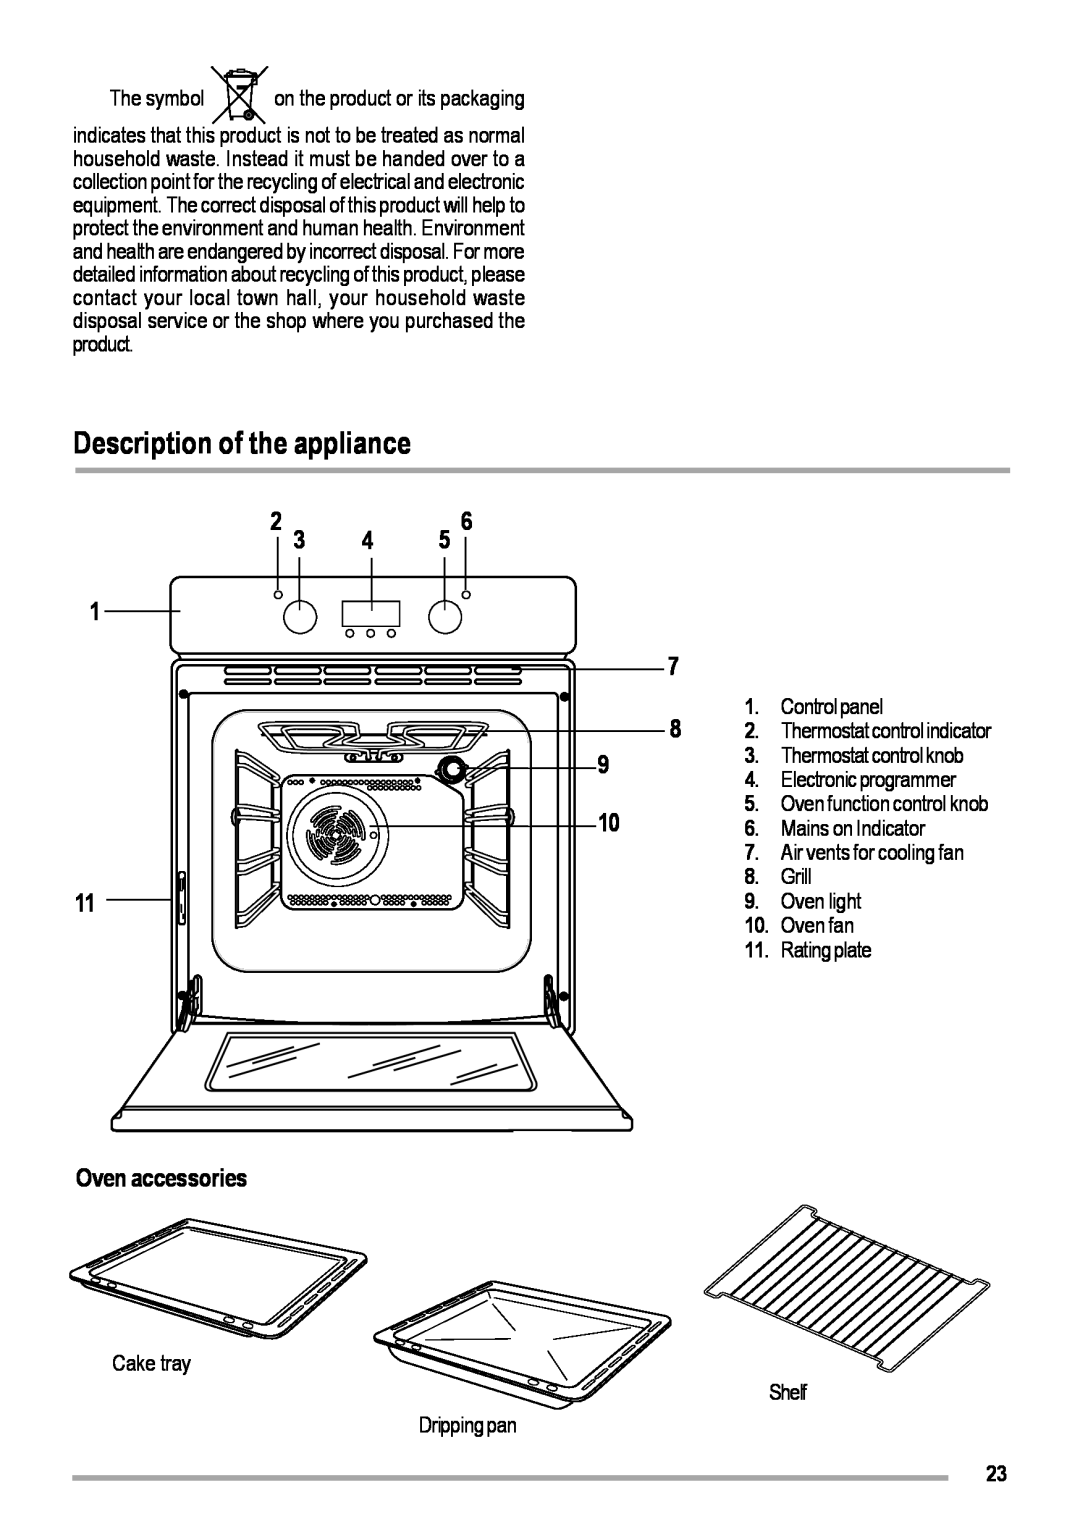 Zanussi ZOB 460 Description of the appliance, Oven accessories, The symbol, Control panel, Mains on Indicator, Oven light 